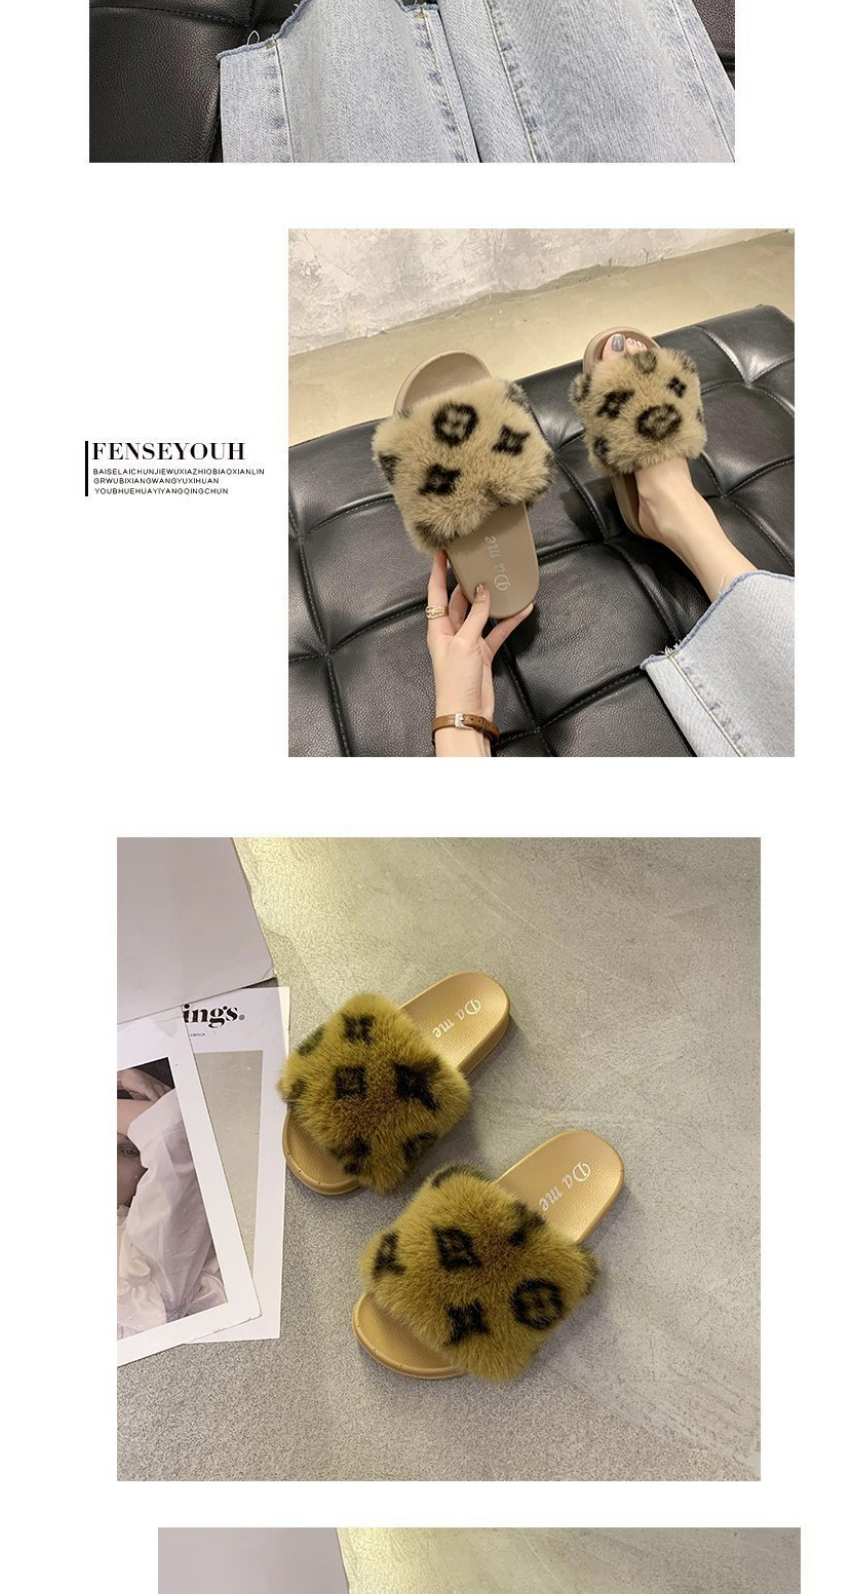 Fashion Yellowish Brown Leopard Print Round Head Flat-bottomed Fur Slippers,Slippers